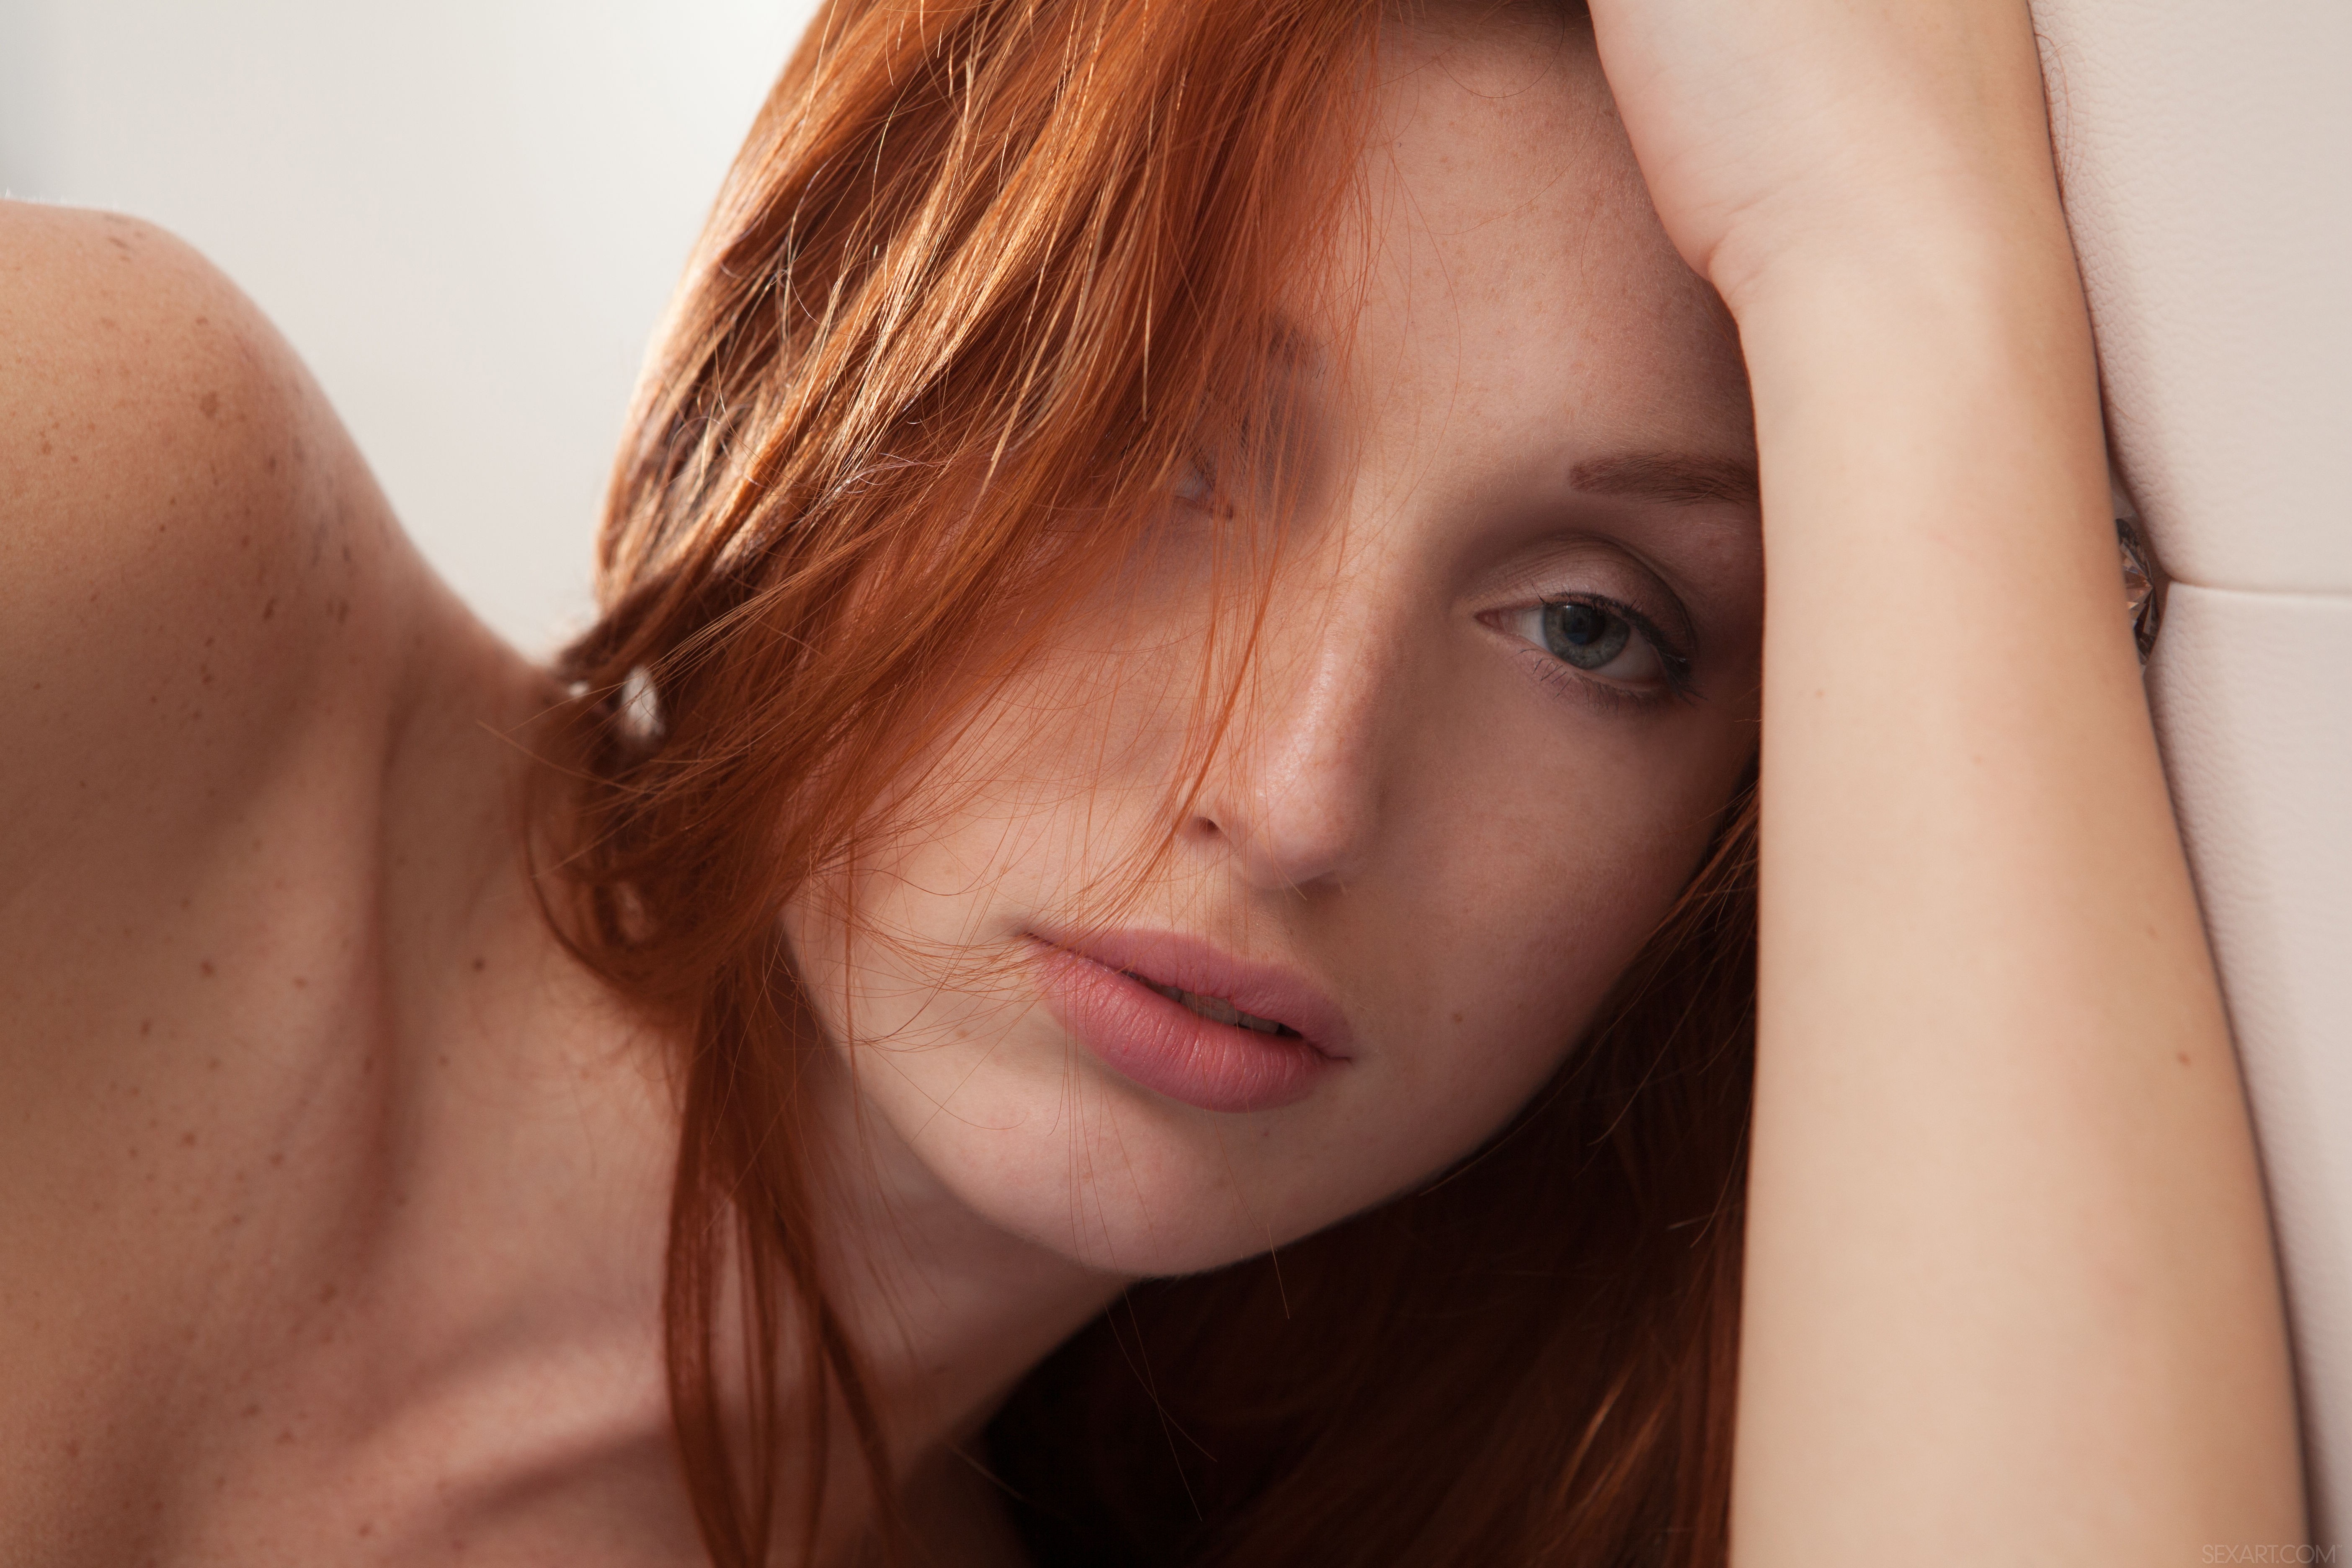 Model Redhead Michelle H Paghie In Bed Wallpaper 177278 5616x3744px On